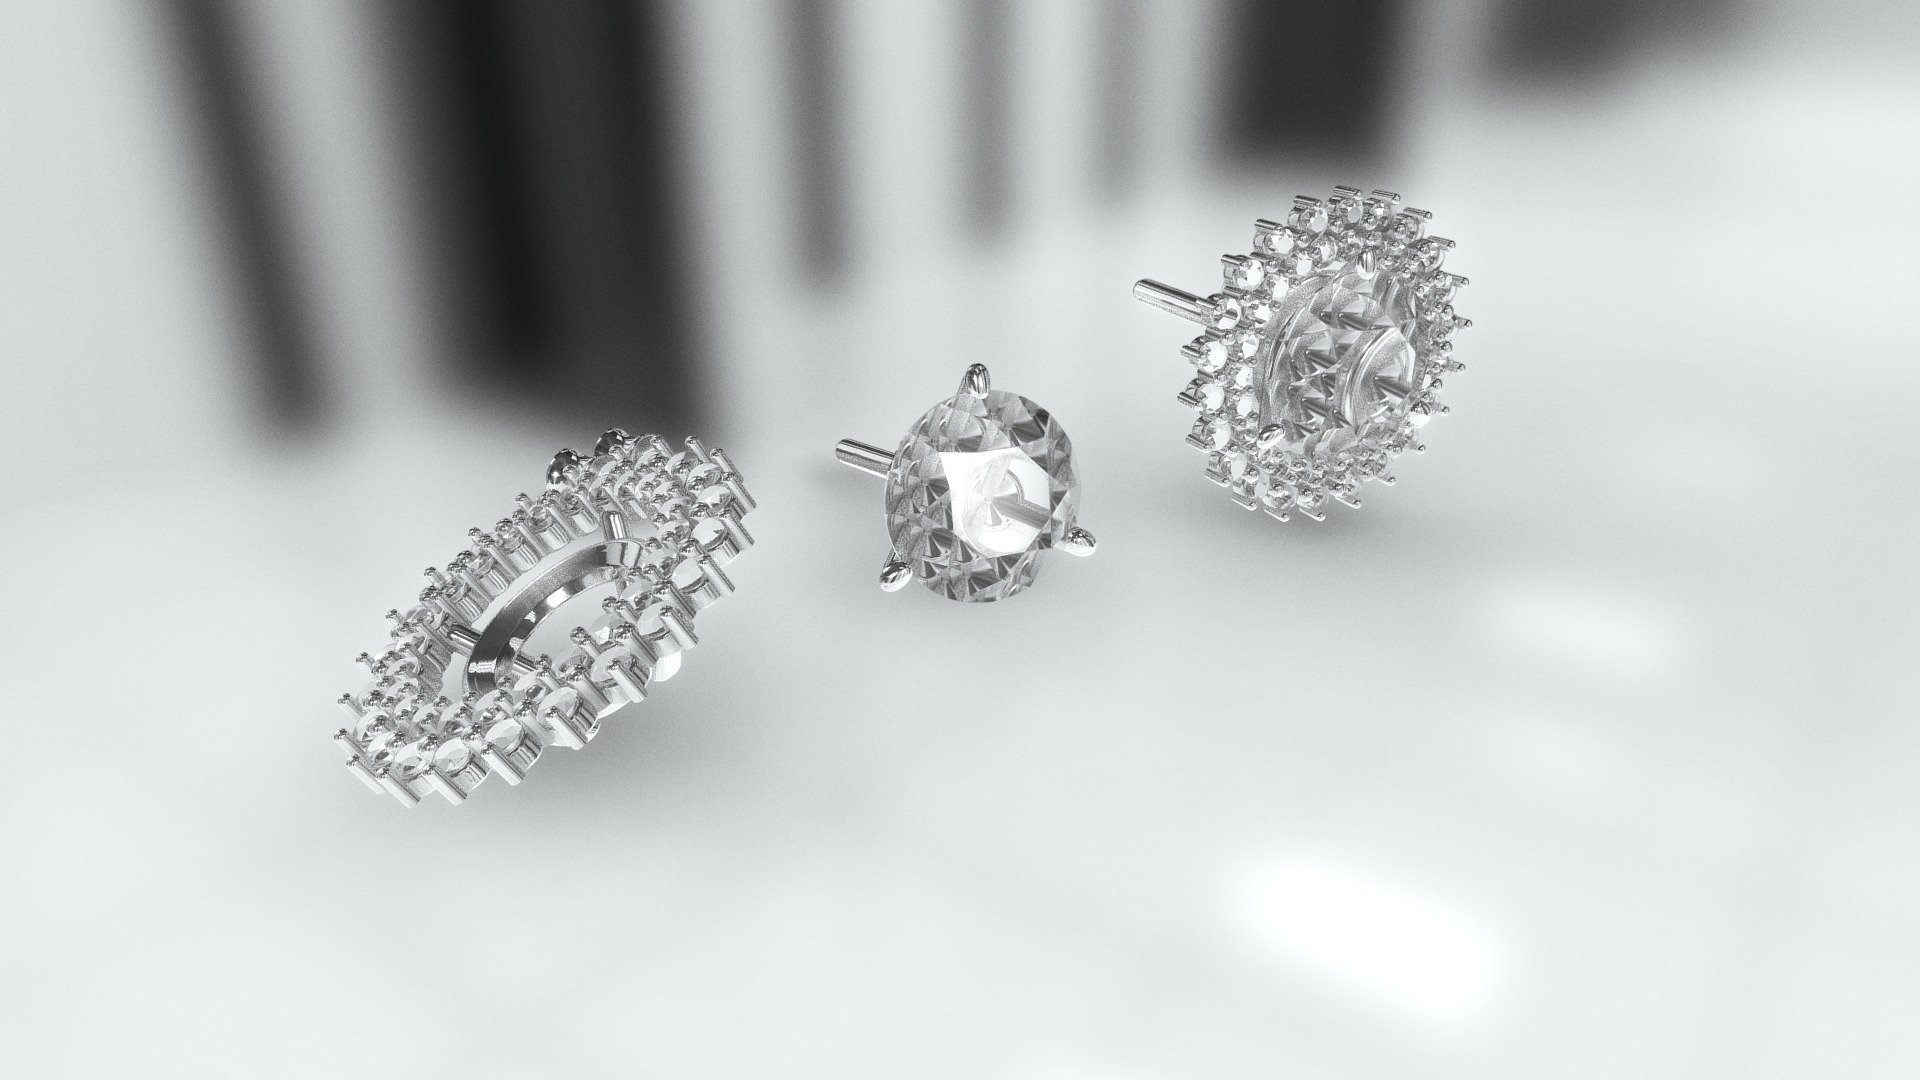 Customable earings studs with 2.5q diamonds each

With 92 .005q diamonds in total

White Gold 14k - Custom earings studs 2.5q Double Halo Demo - 3D model by Luis Rocha (@TherochaDesigner) 3d model